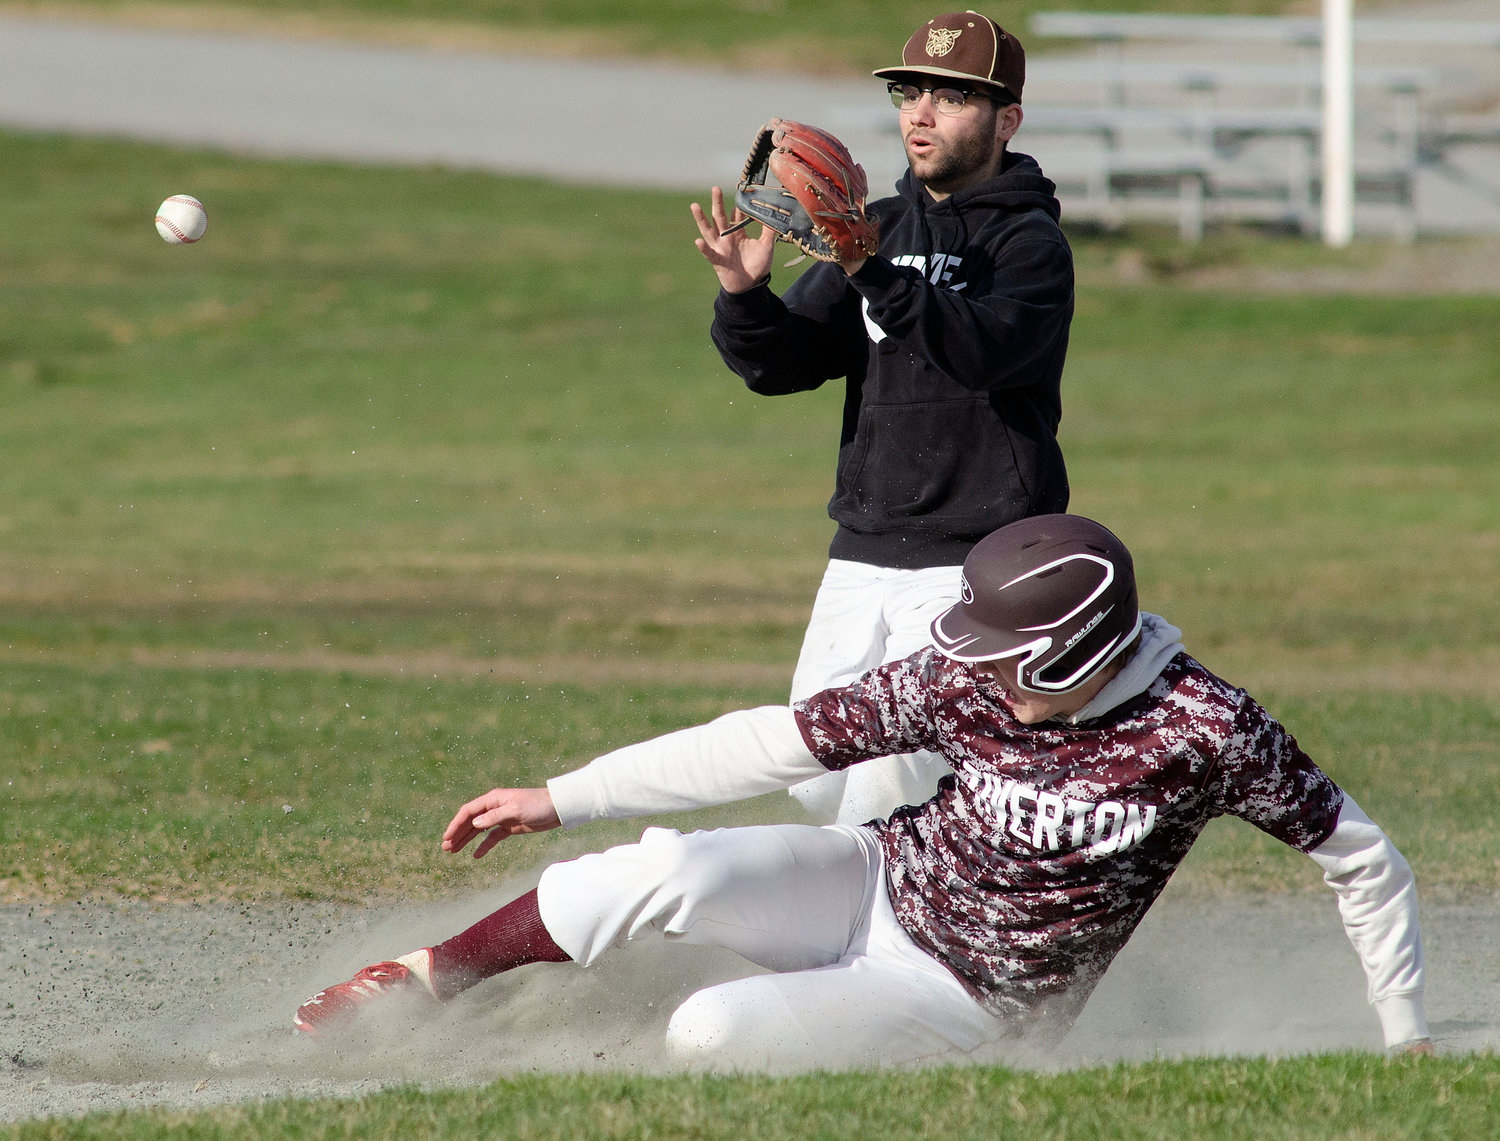 Second baseman Nick Arruda (middle) fields a throw from shortstop Noah Sowle during a scrimmage game against Tiverton on Wednesday.